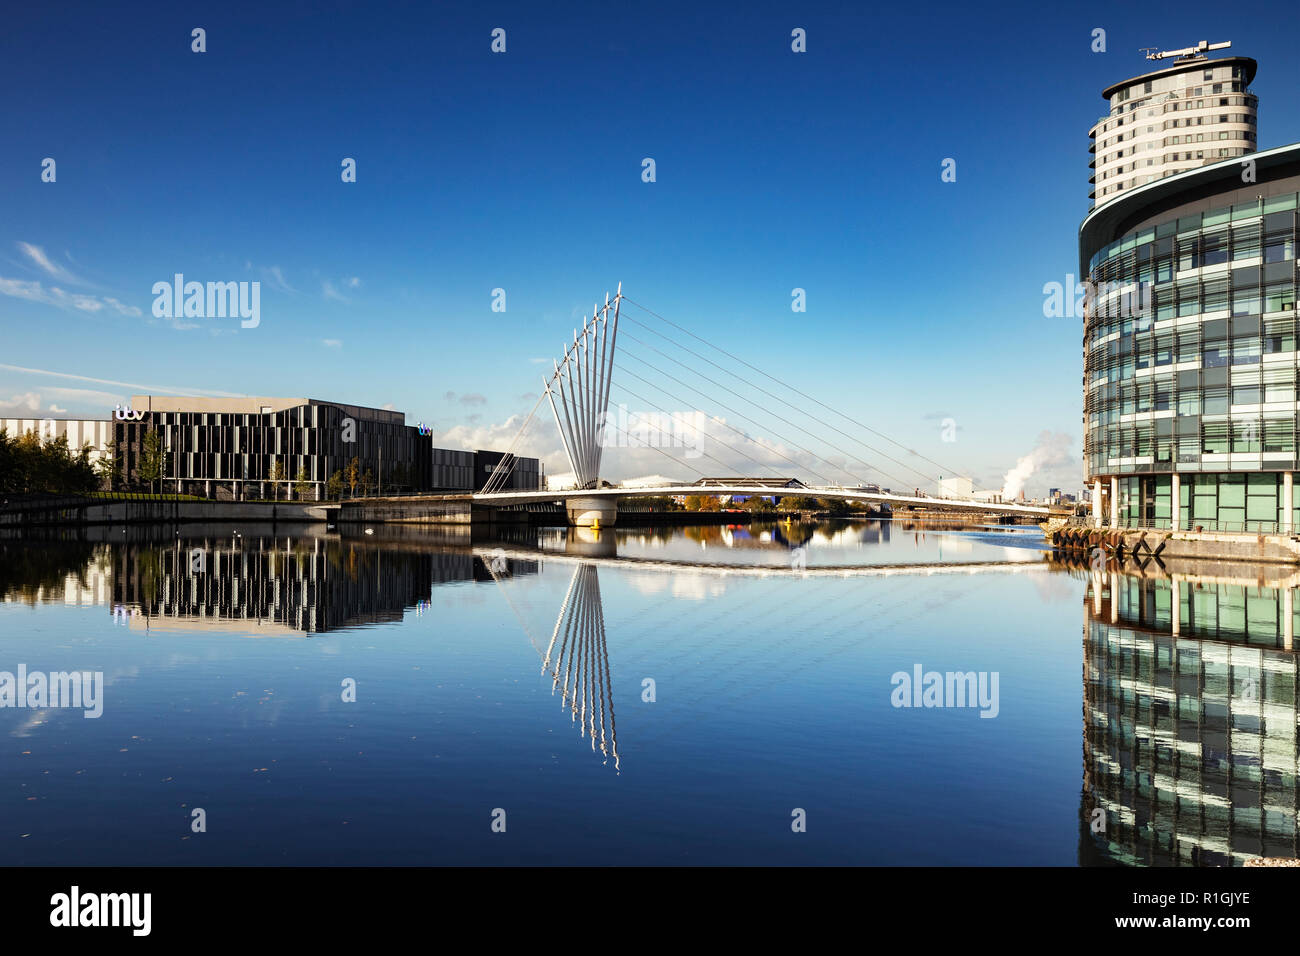 2 November 2018: Salford Quays, Manchester, UK - Media City Footbridge, reflected in the Manchester Ship Canal. Stock Photo